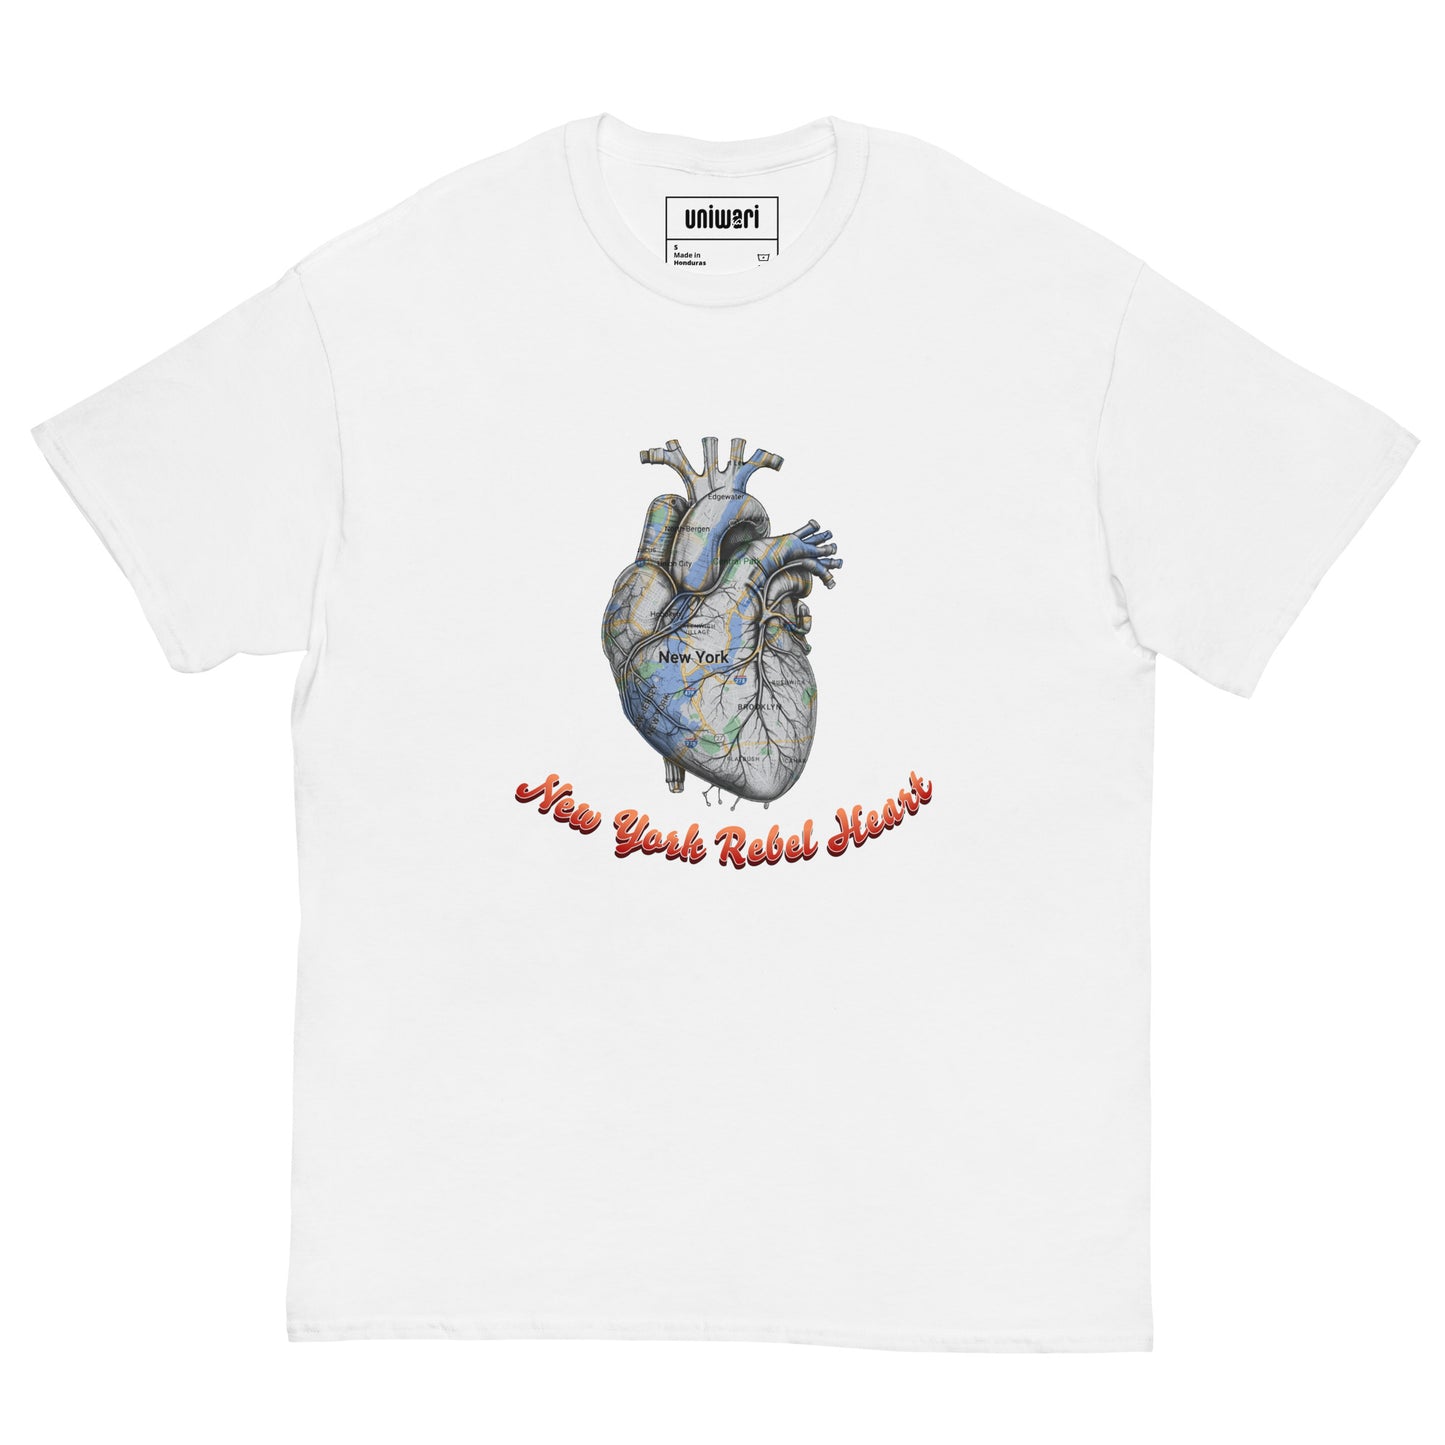 White High Quality Tee - Front Design with a Heart Shaped Map of New York and a Phrase "New York Rebel Heart" print